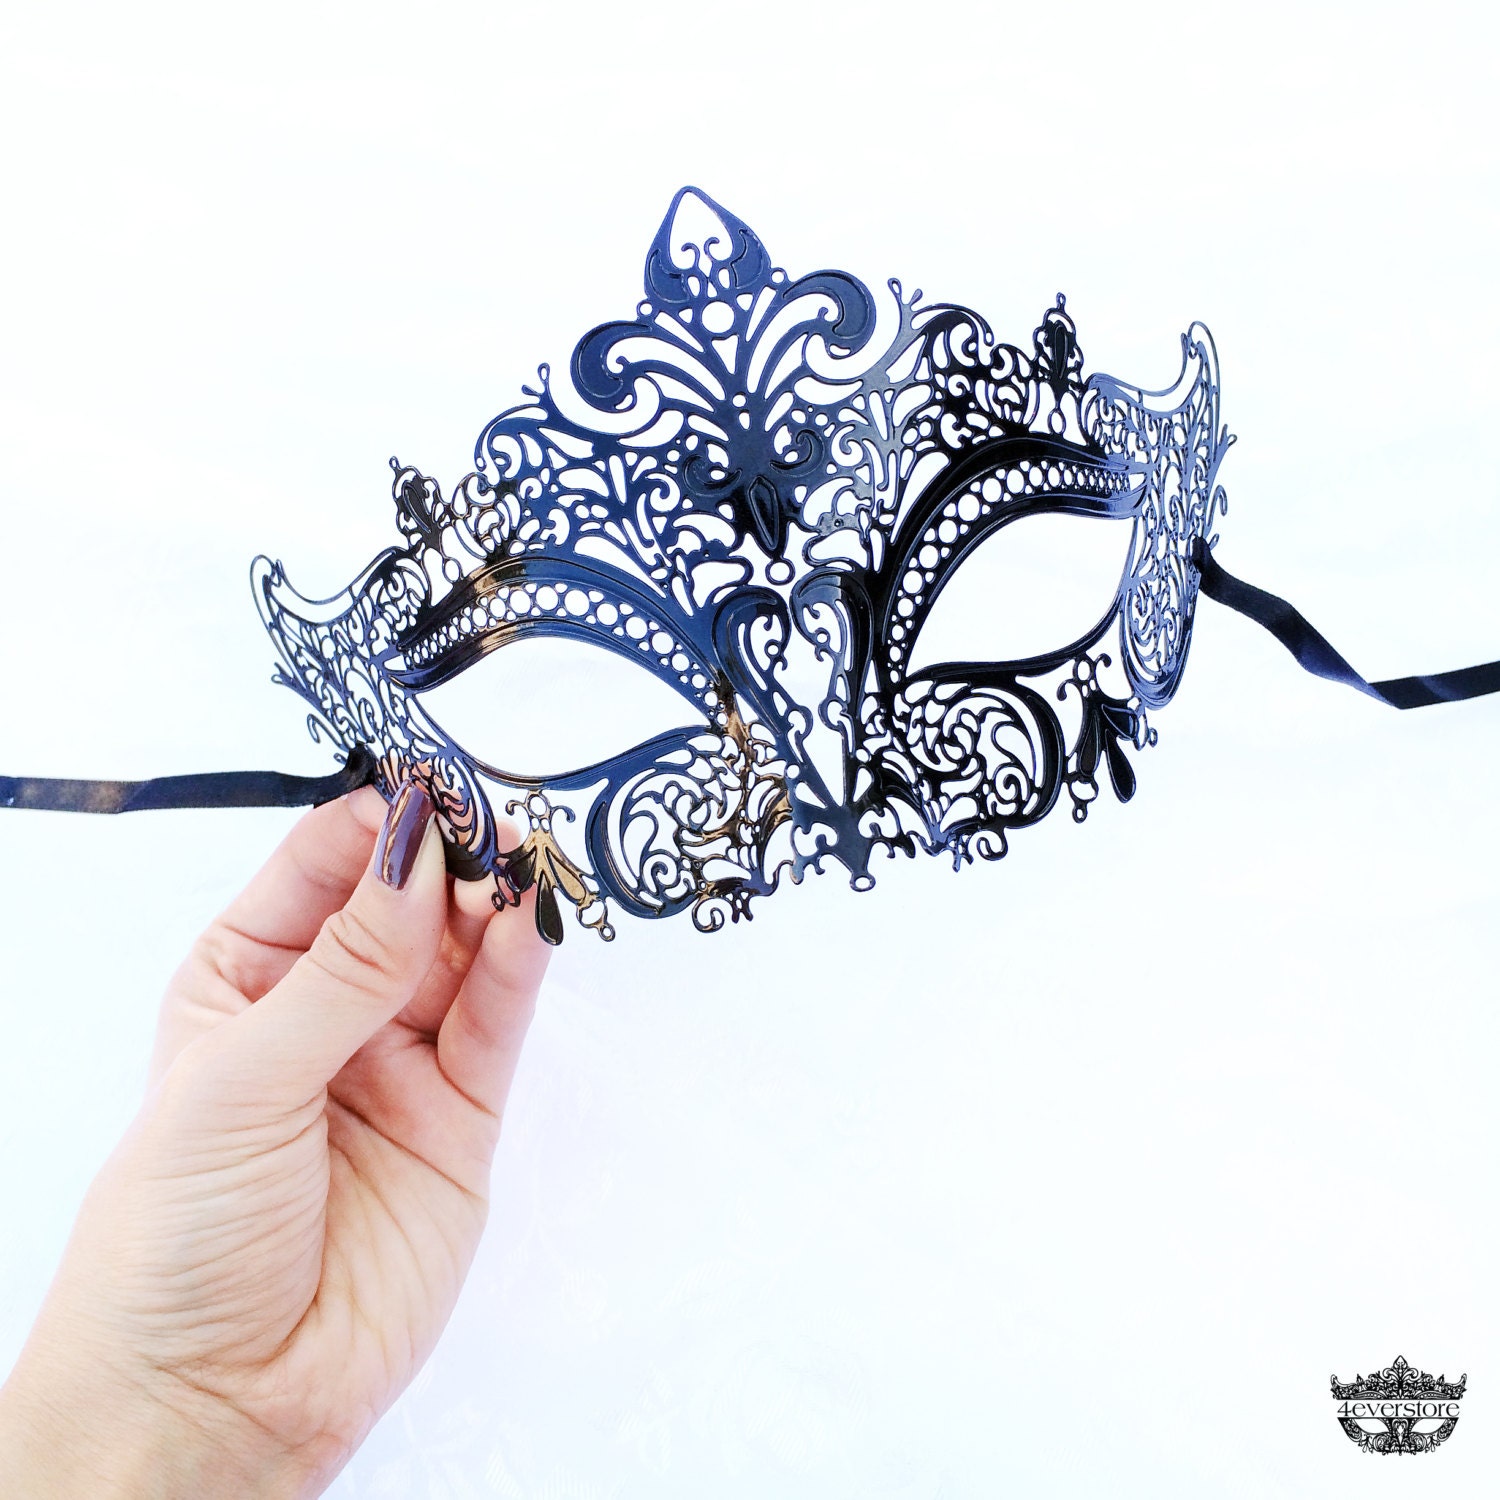 Thought I'd share this masquerade mask I made for an event this year :  r/crafts